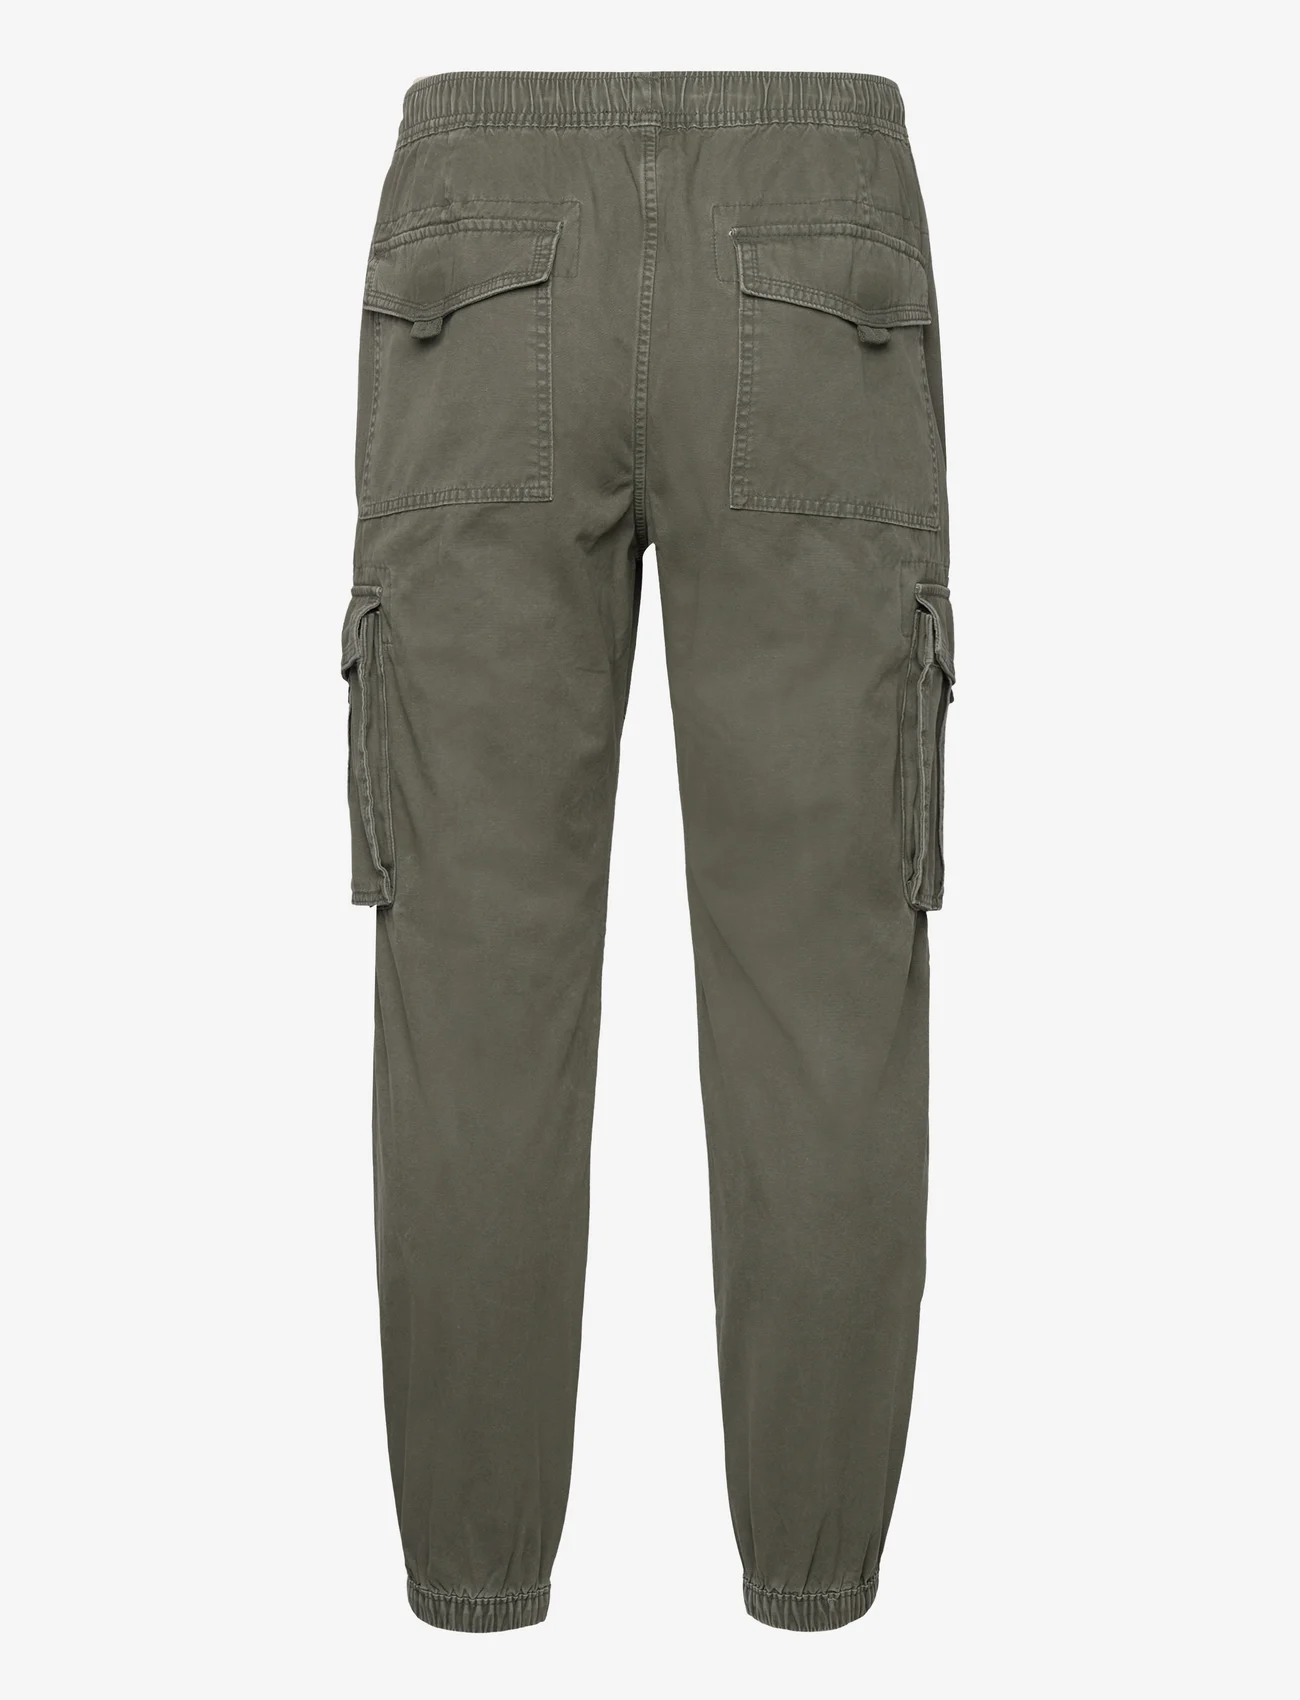 Abercrombie & Fitch - ANF MENS PANTS - cargohose - pine - 1